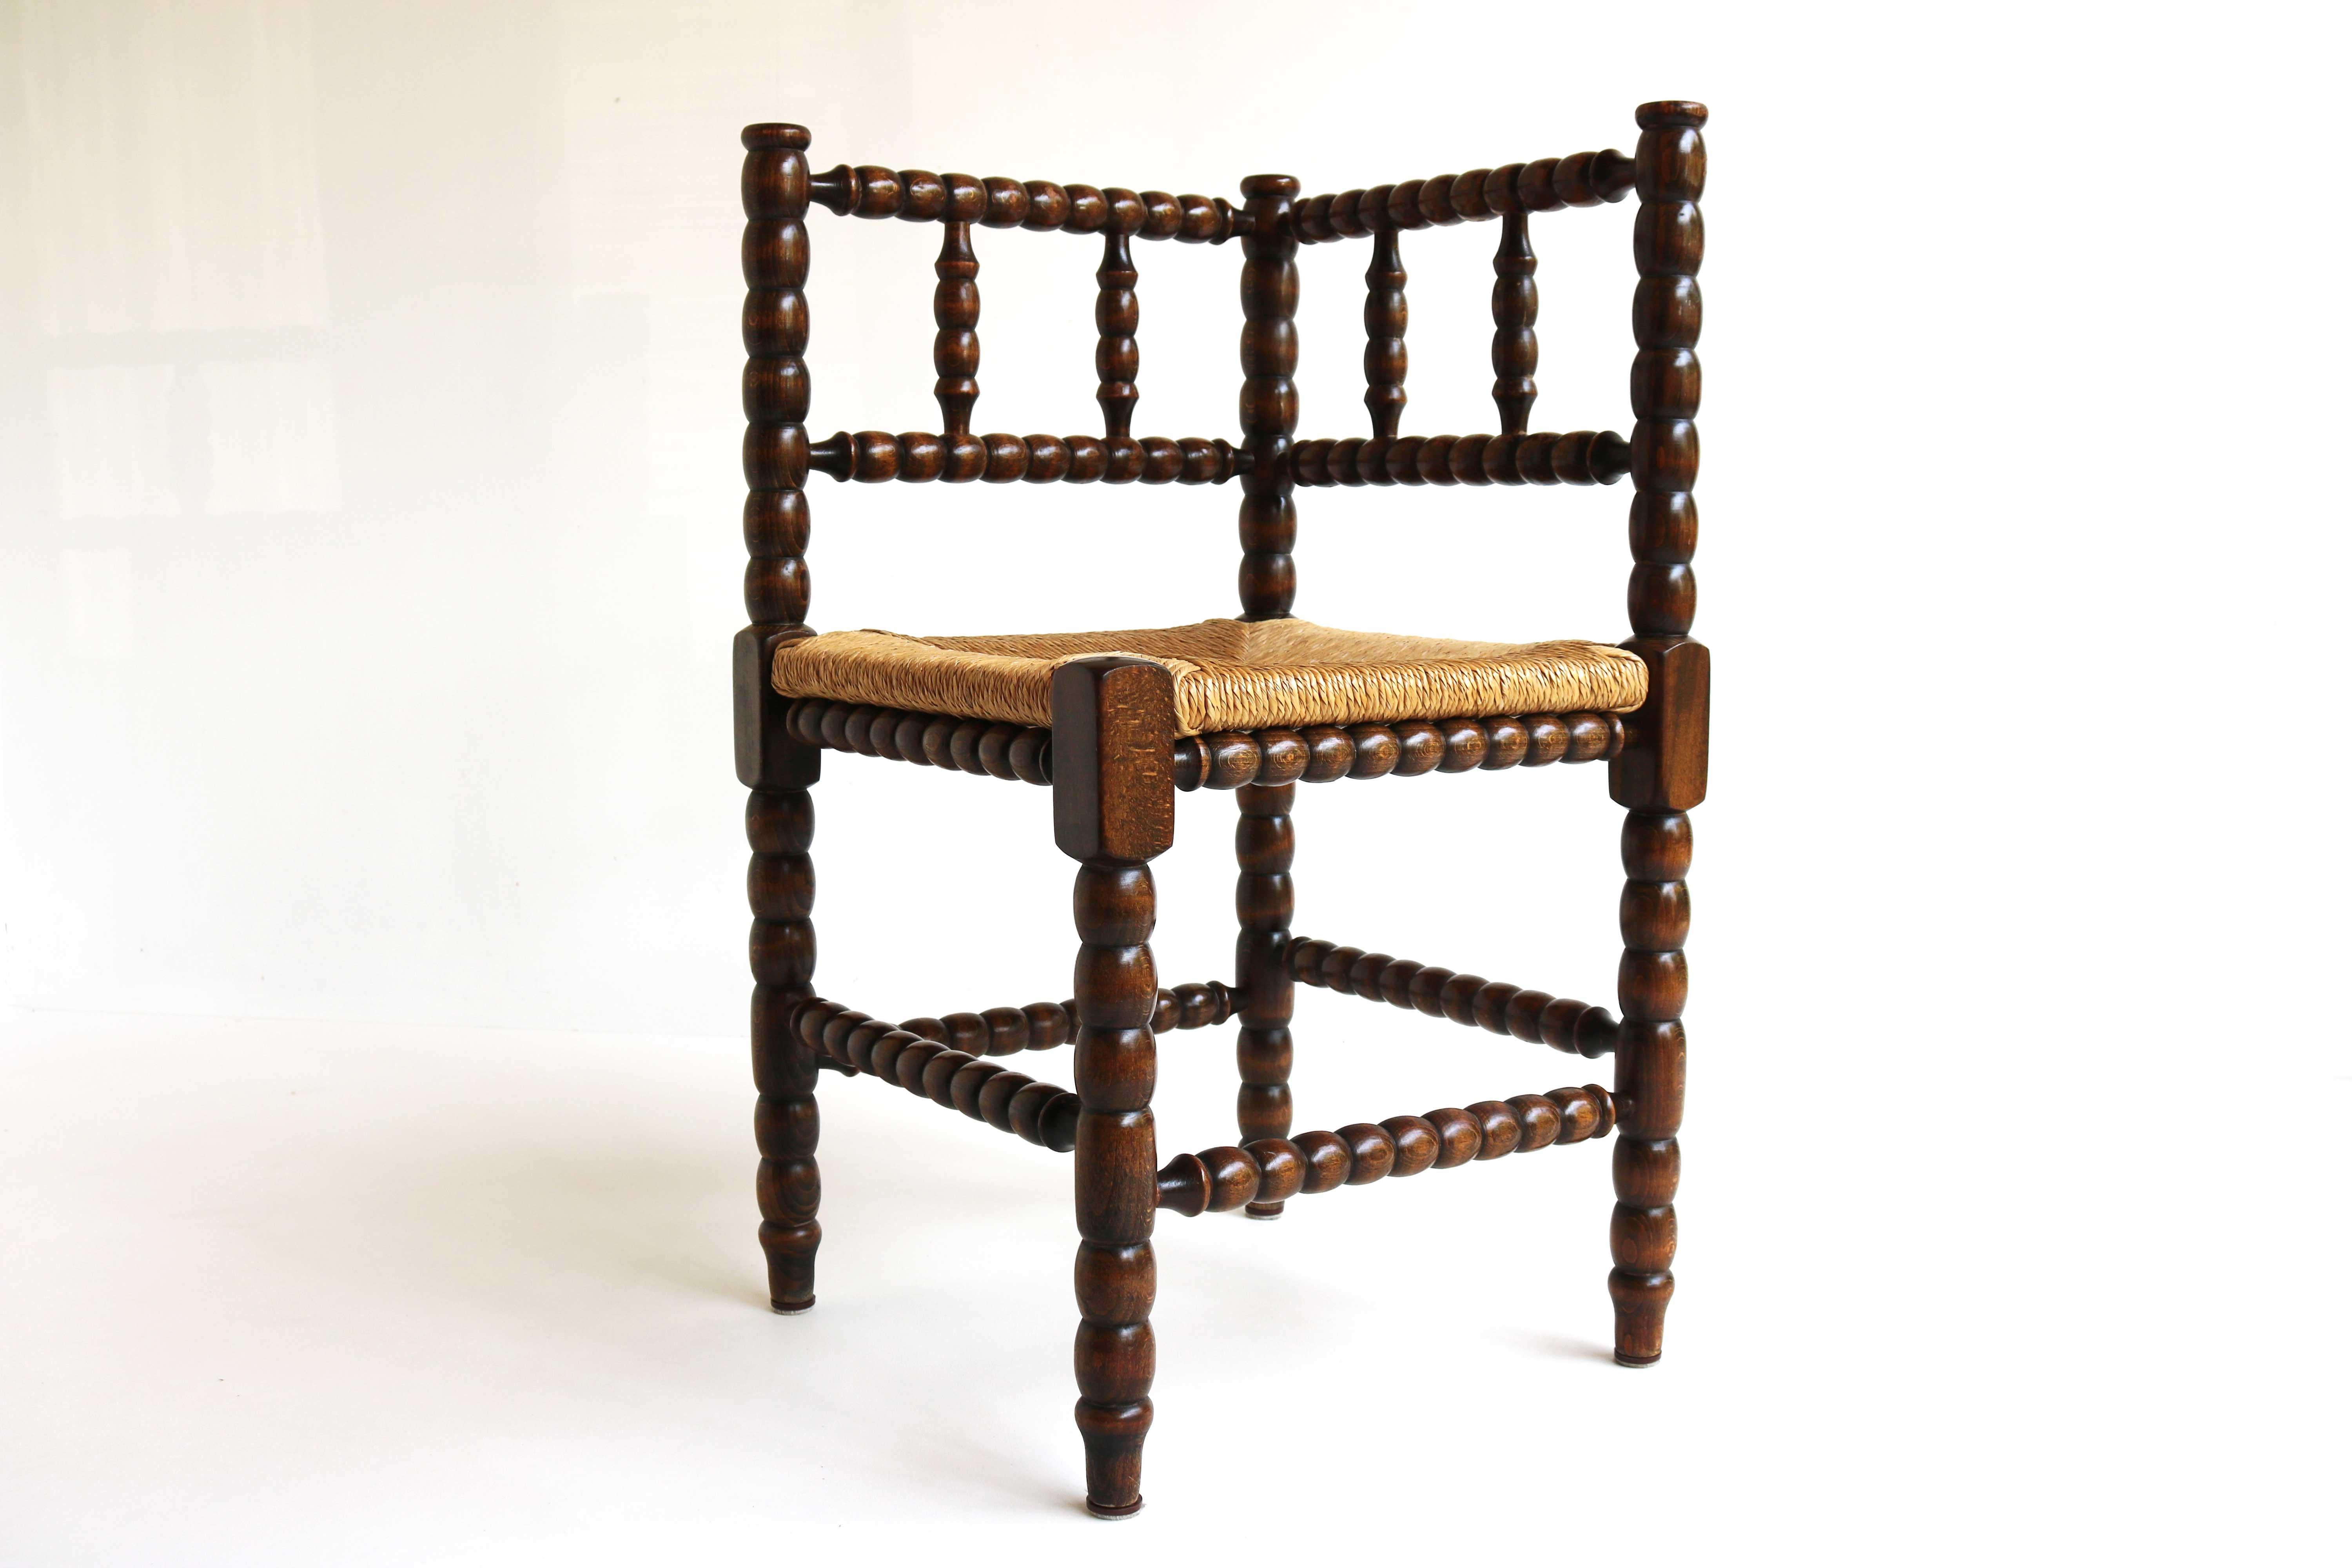 Lovely typical Dutch knitting chair.
This antique 'corner chair' with wicker seat is originally a typical Old Dutch knitting chair/ thelephone chair.
Older women used to often sit in these chairs knitting. These types of chairs were made with only